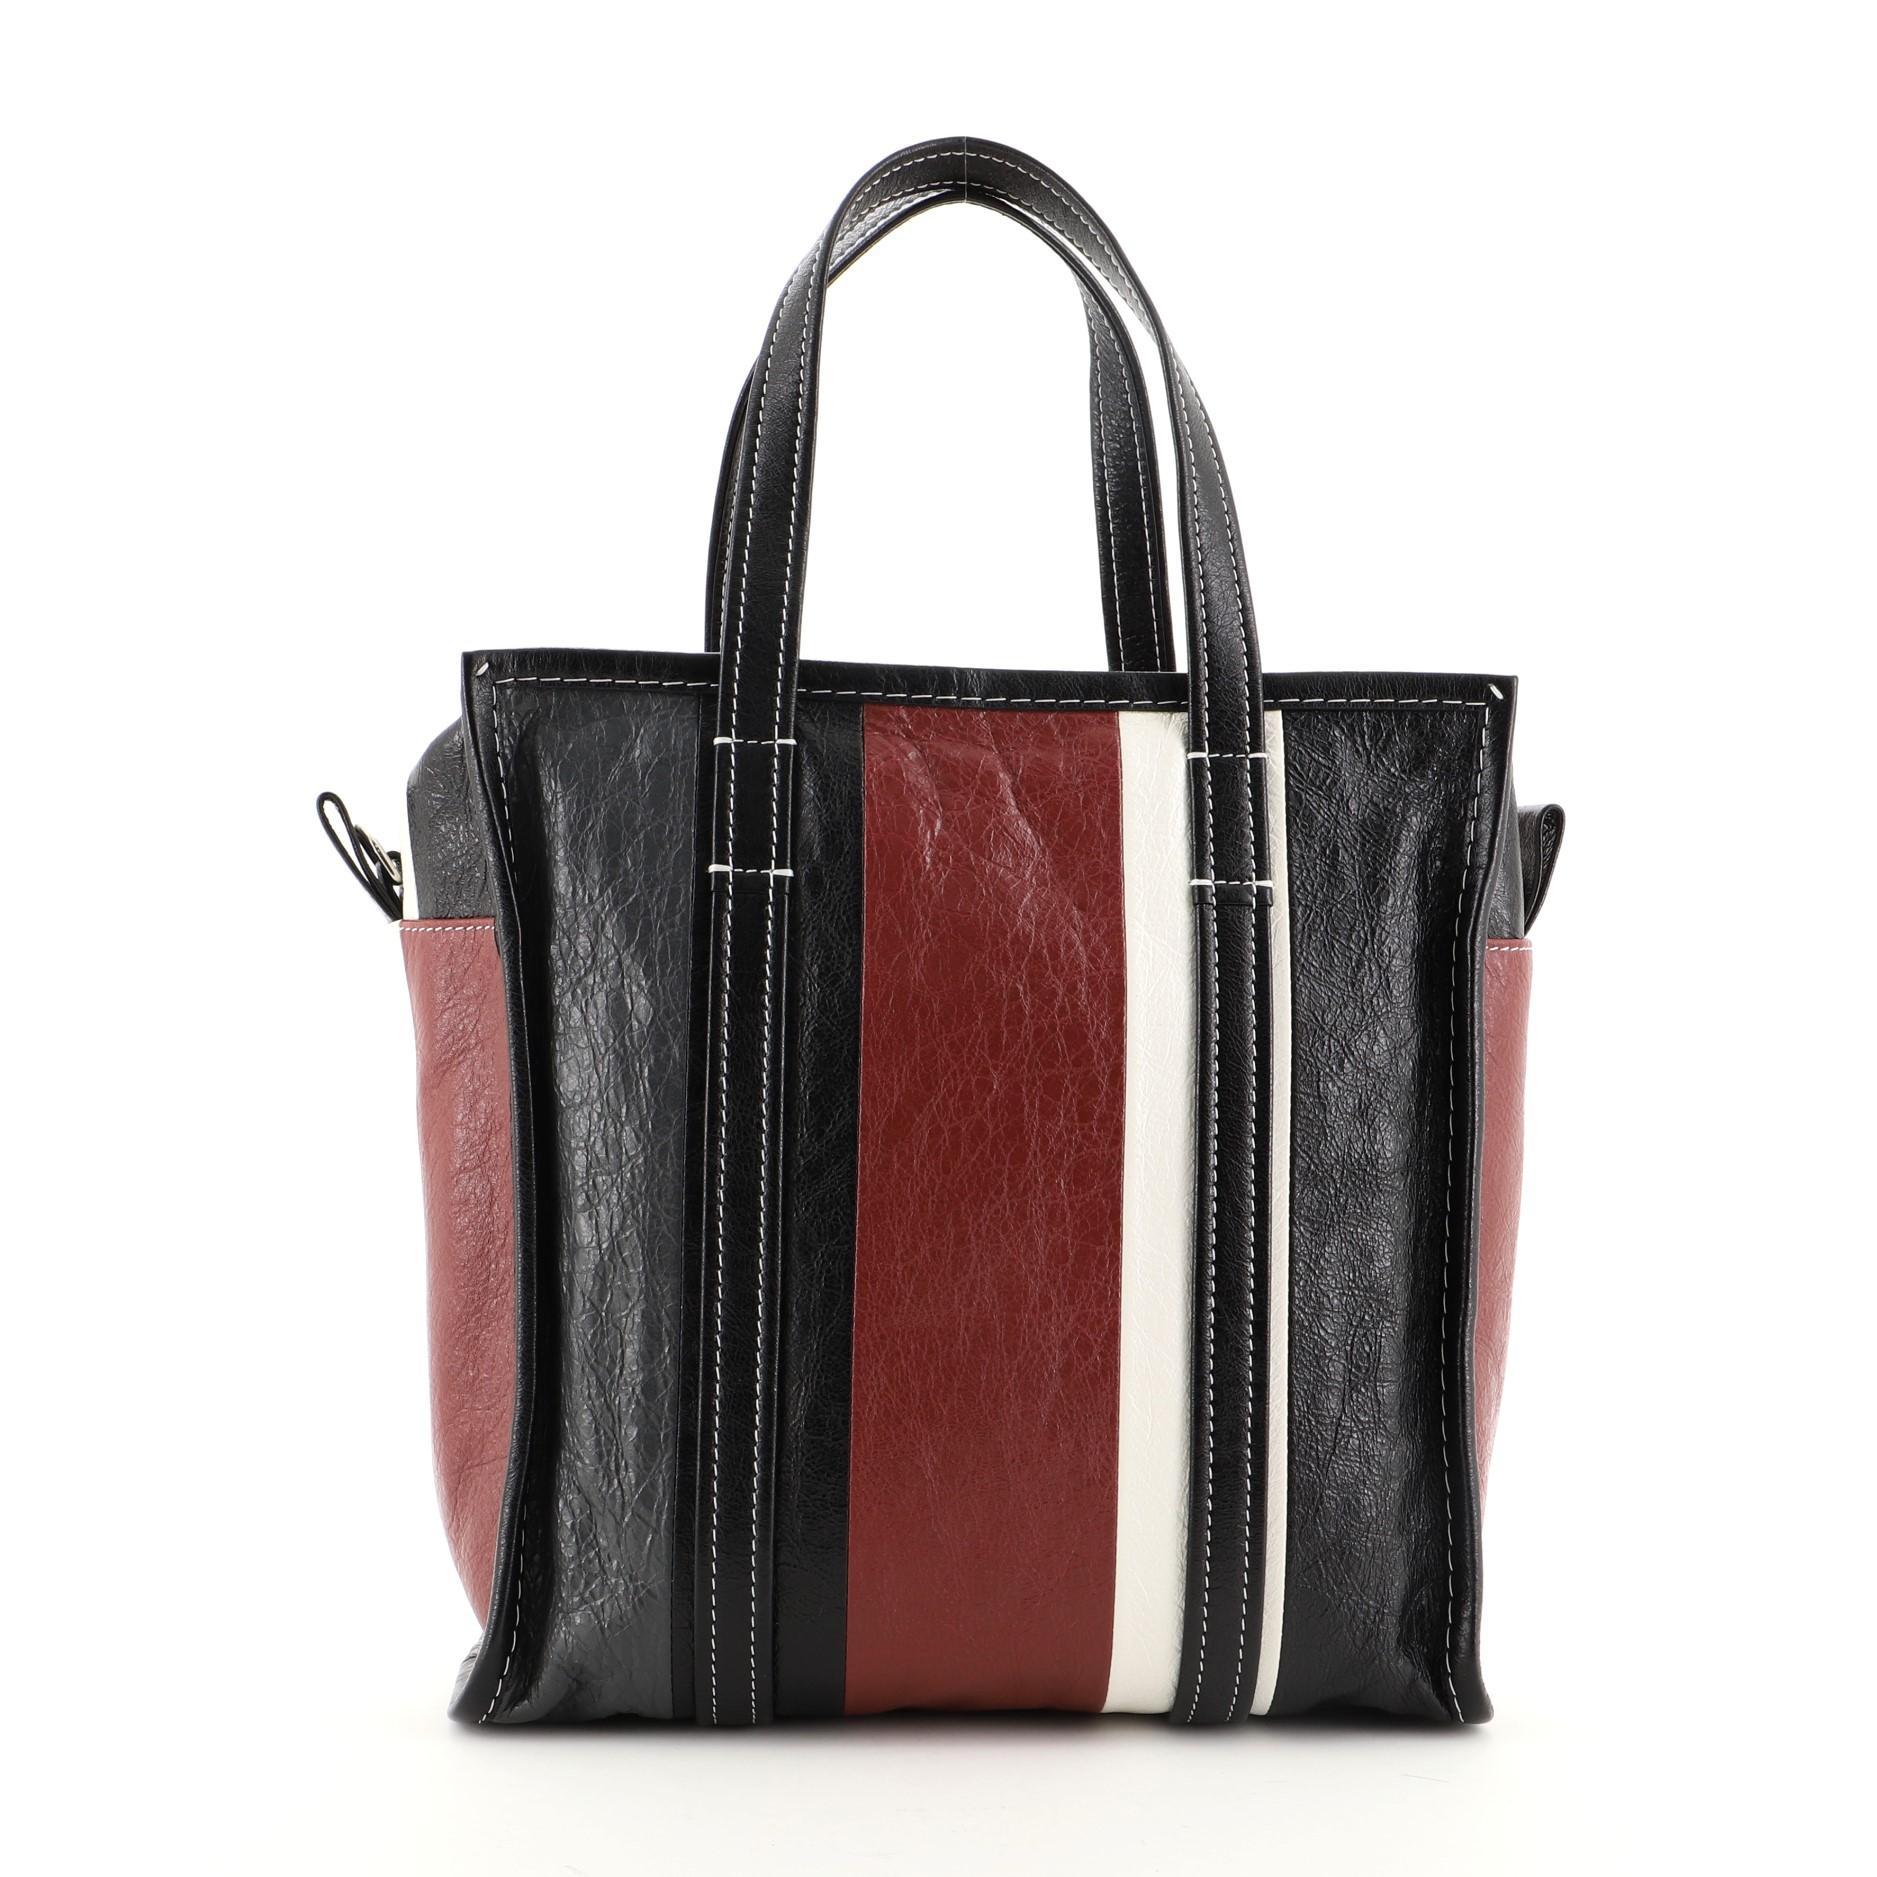 Balenciaga Bazar Convertible Tote Striped Leather Small
Black Red Striped Leather

Condition Details: Creasing on exterior and handles, small glue stains on base, heavy discoloration on opening trim, scratches on hardware.

44845MSC

Height 11